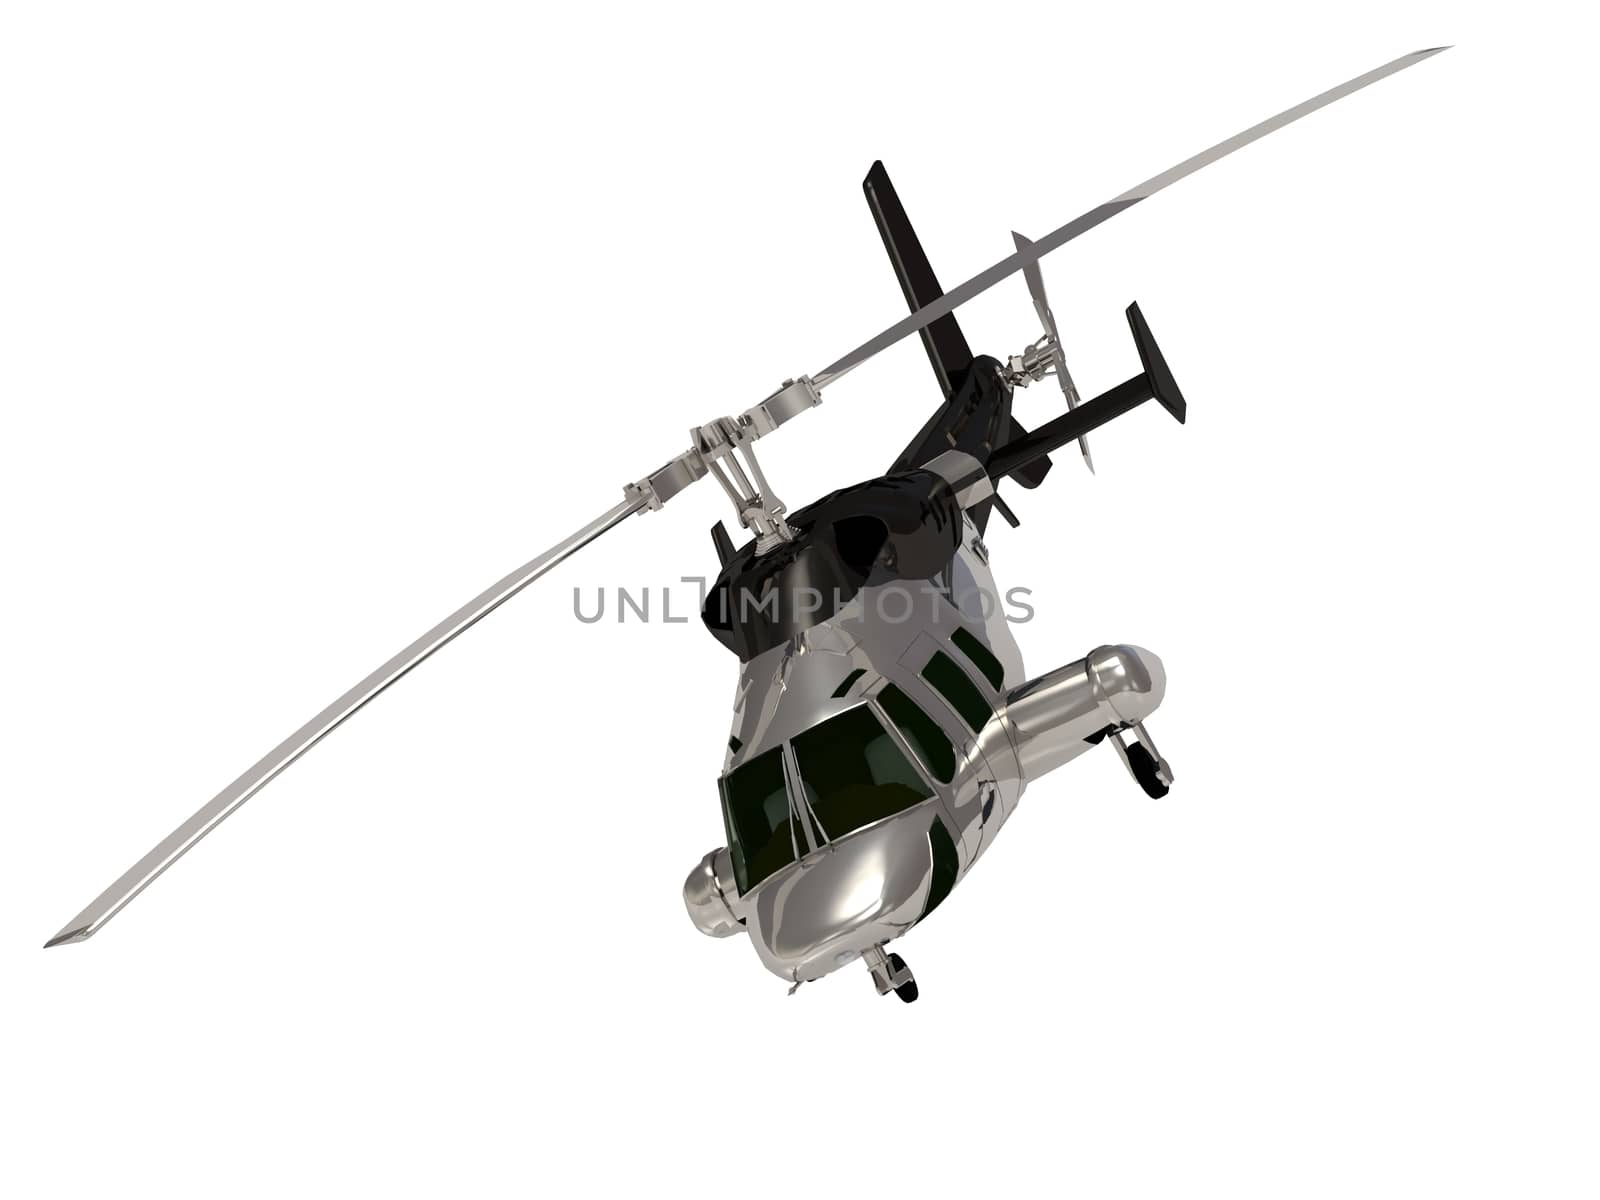 Fighter ARMY Silver helicopter by GreenMost